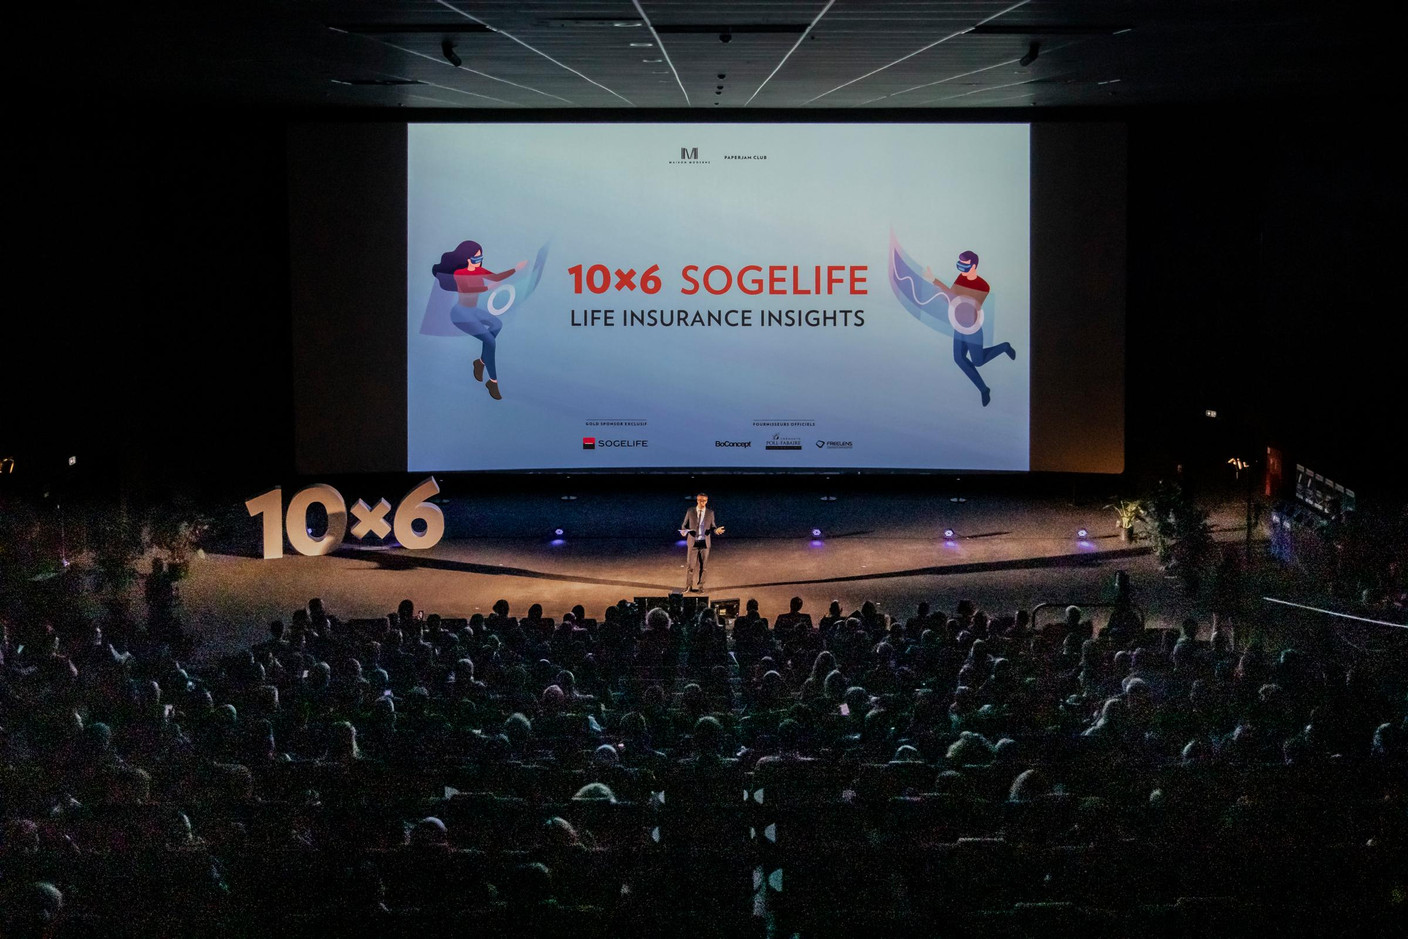 10x6 Sogelife: Life insurance insights - 20.11.2019 (Photo: Jan Hanrion et Patricia Pitsch / Maison Moderne)